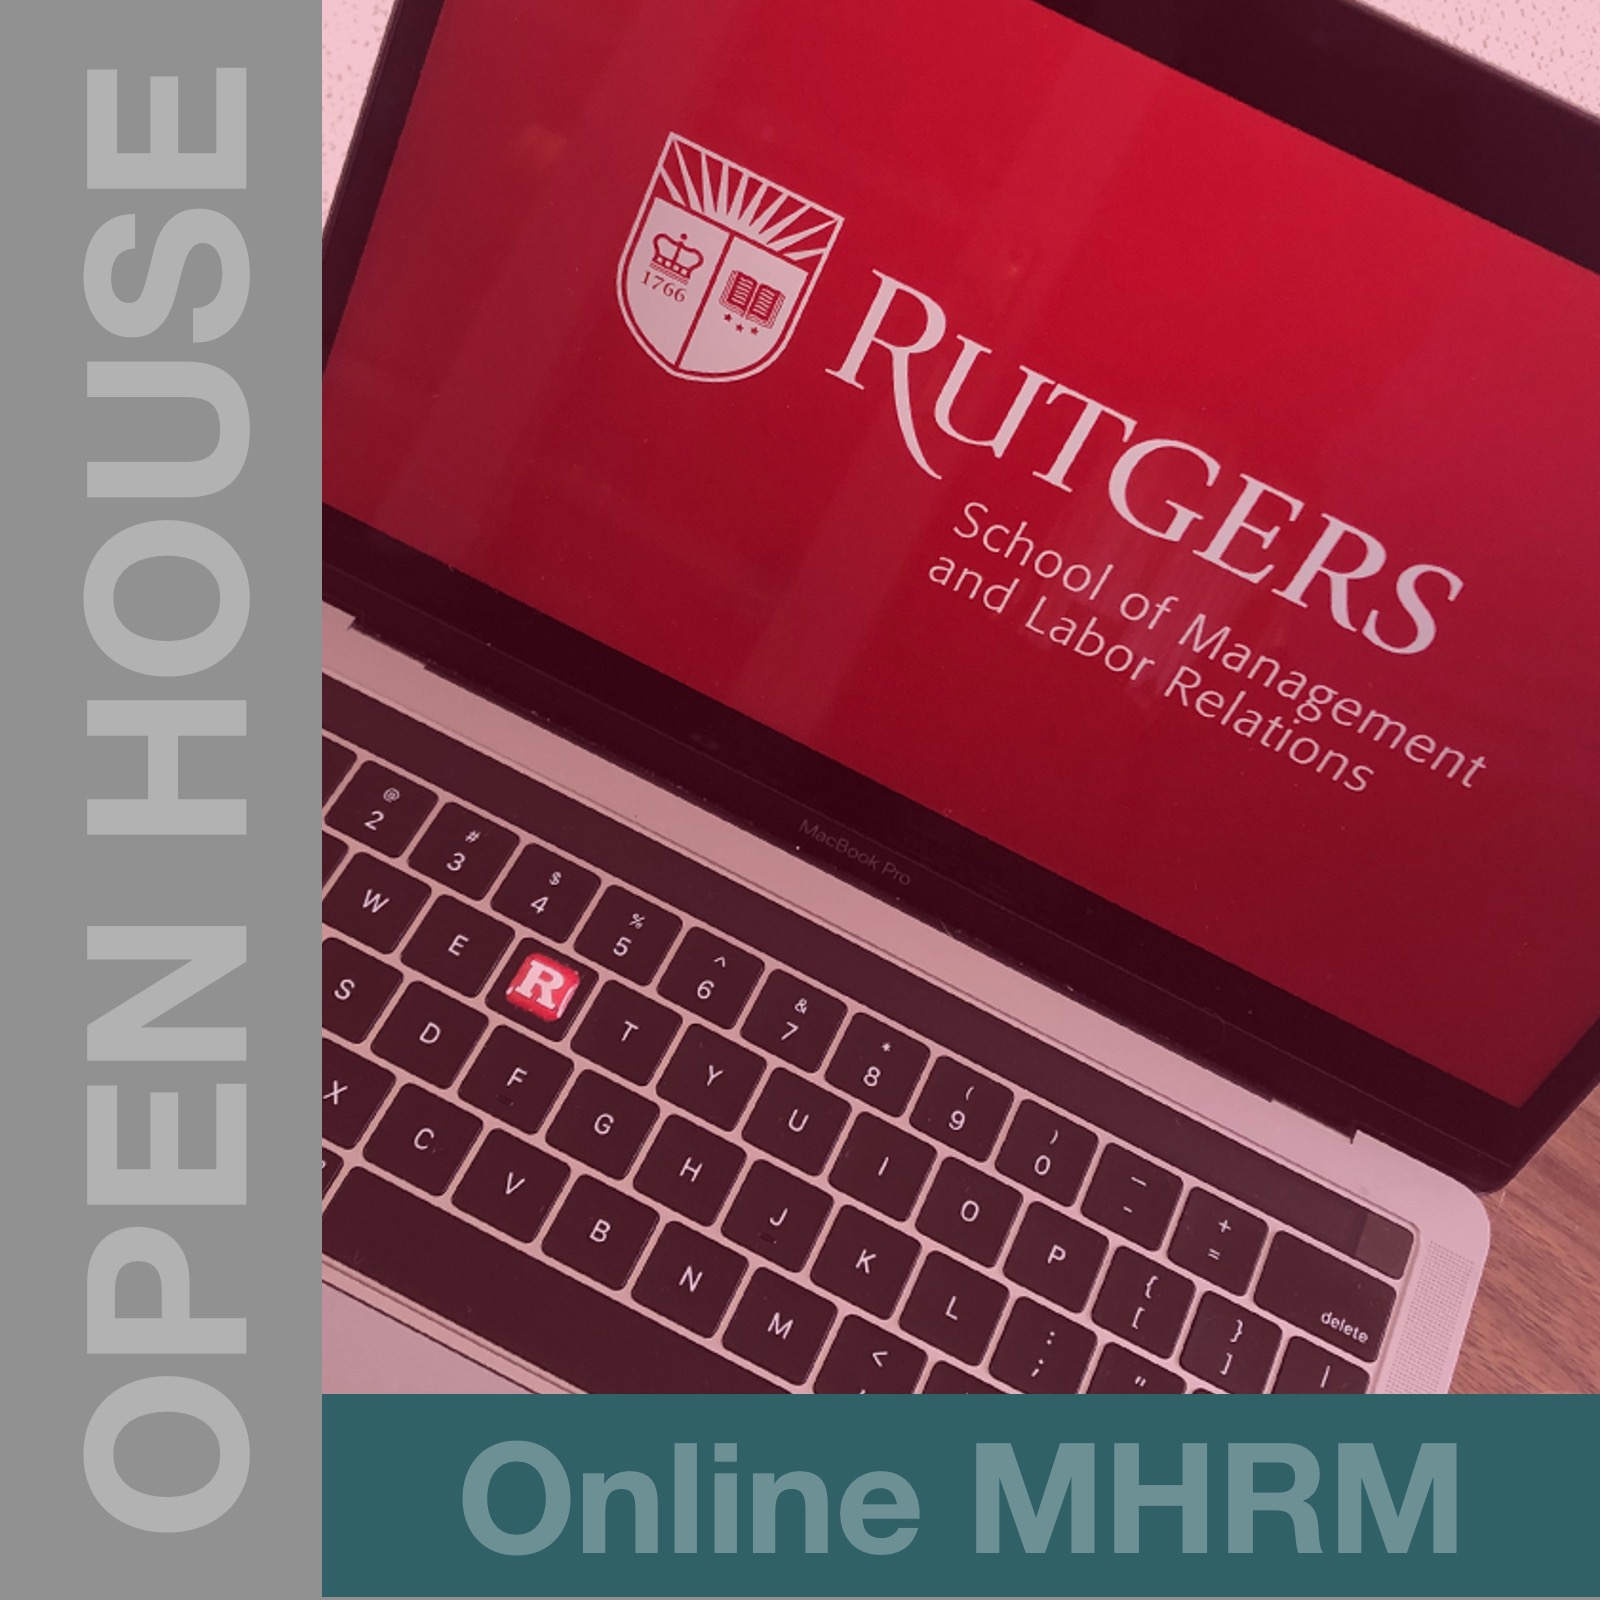 image of computer for online MHRM open house